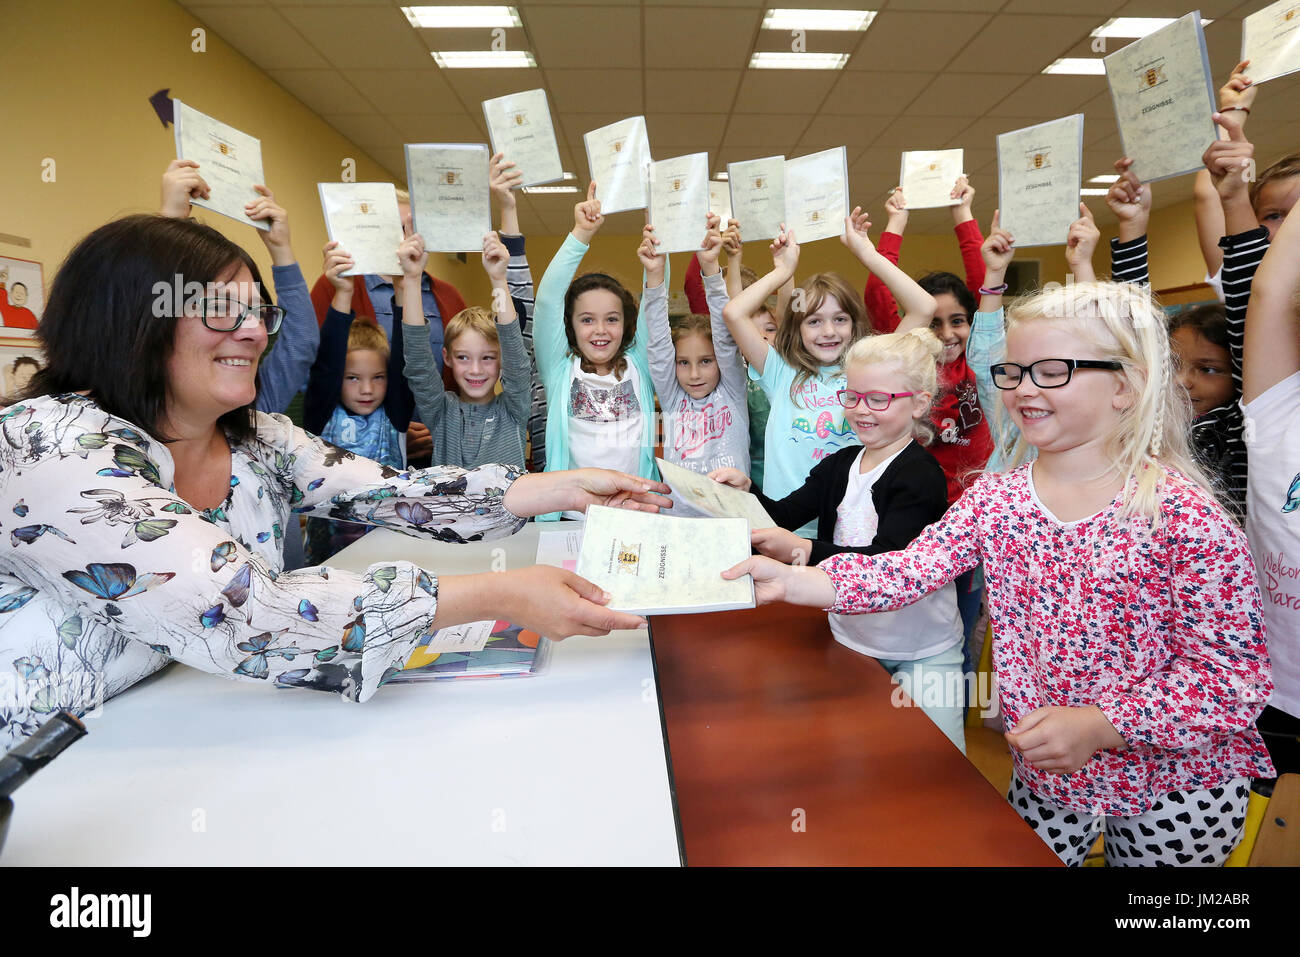 Birgit Kohler (L), 1st grade teacher of Durmentingen Elementary, gives certificates to children in the state of Baden-Württemberg, Germany, 26 July 2017. Students are packing their certificates and finally leaving the classrooms. Summer vacations start for more than 1.5 million students in Baden-Württemberg. Photo: Thomas Warnack/dpa Stock Photo